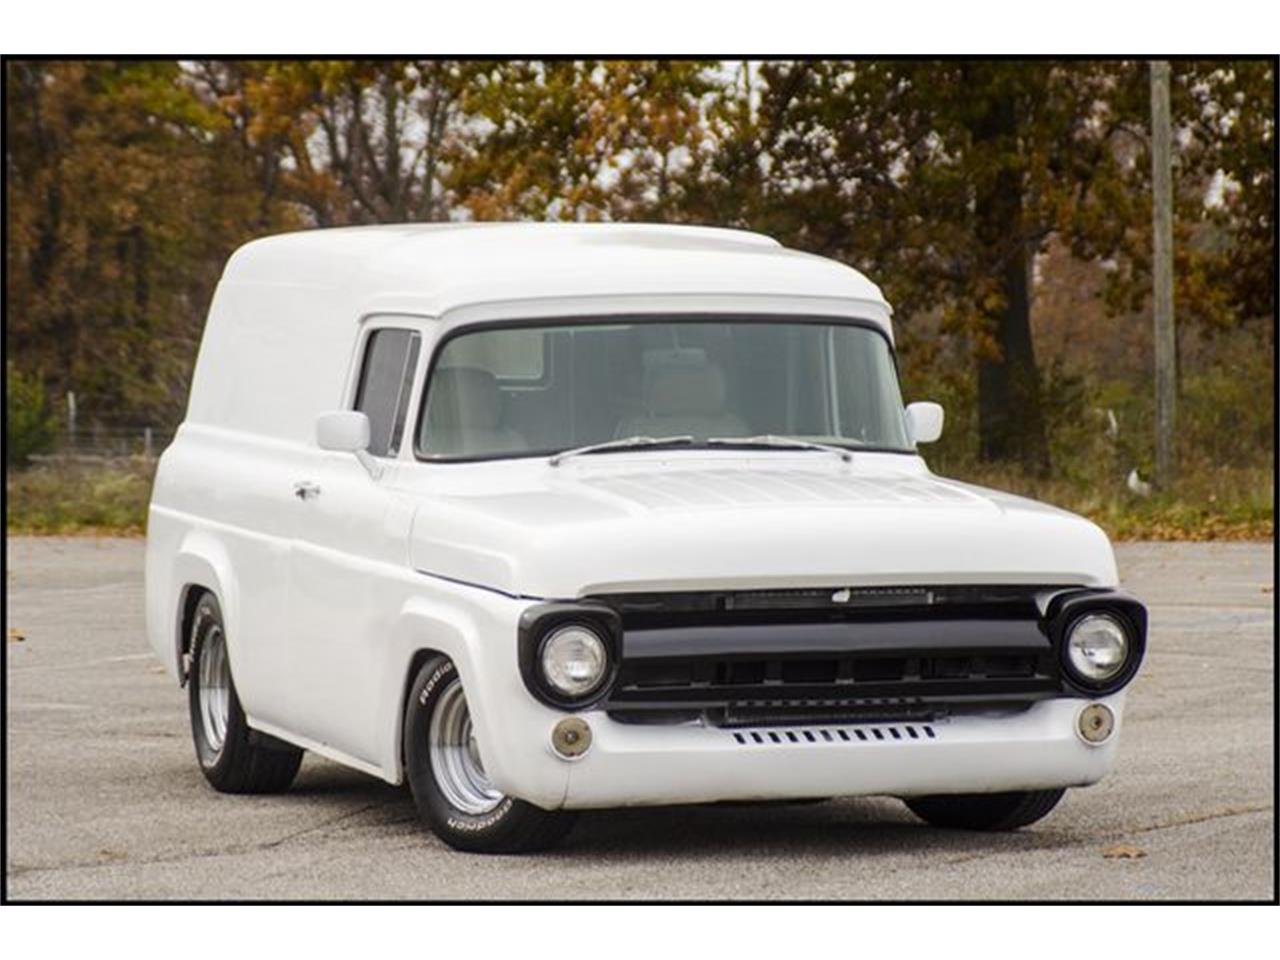 1957 Ford Panel Truck for Sale | 0 | CC-1169879